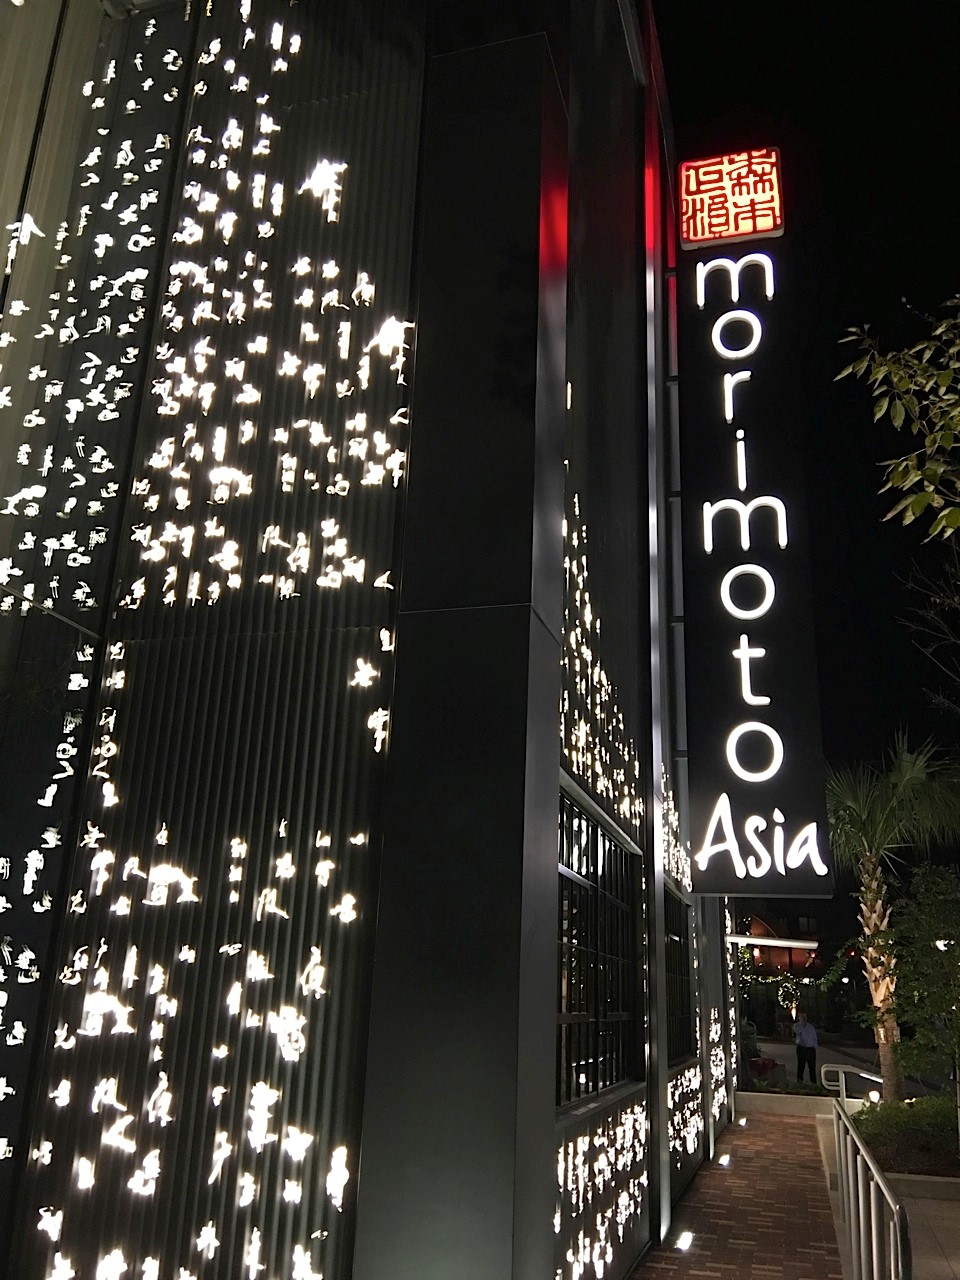 New To-Go Concept Begins May 15th at Morimoto Asia in Disney Springs